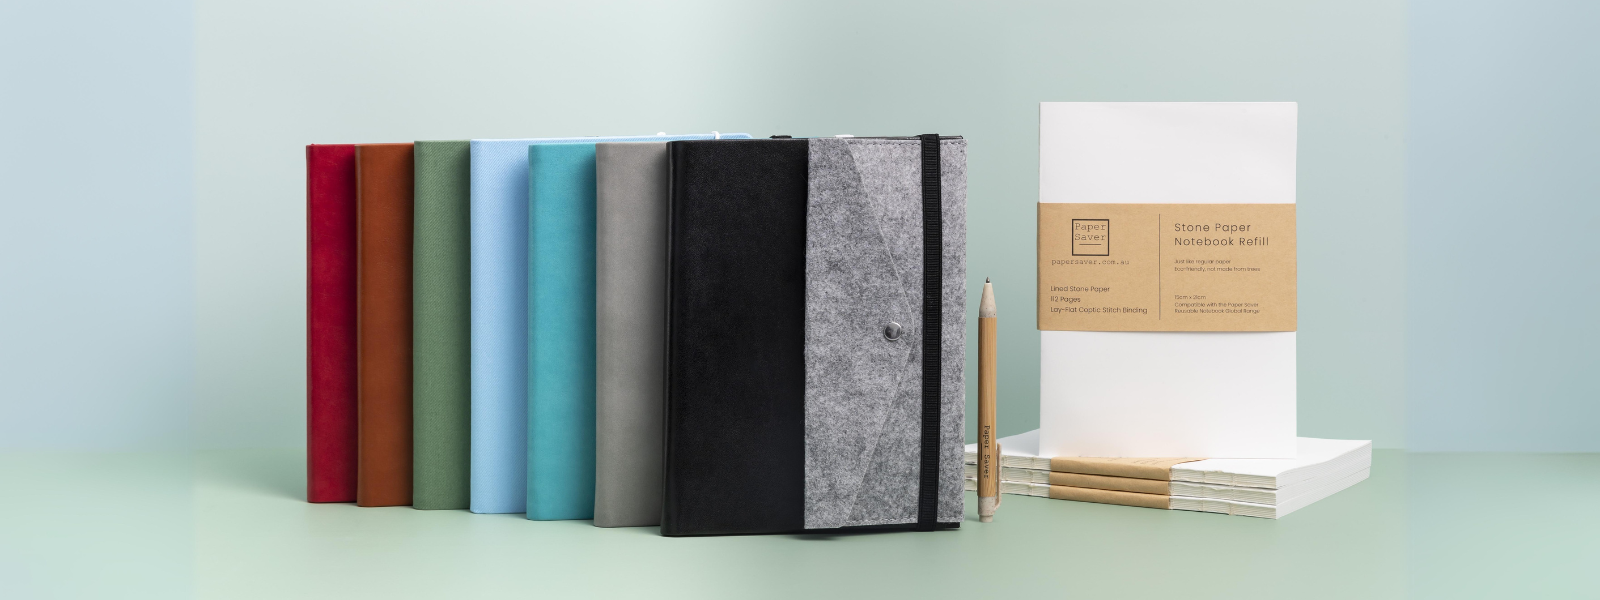 The Paper Saver Refillable Stone Paper Notebook range for sustainable living.